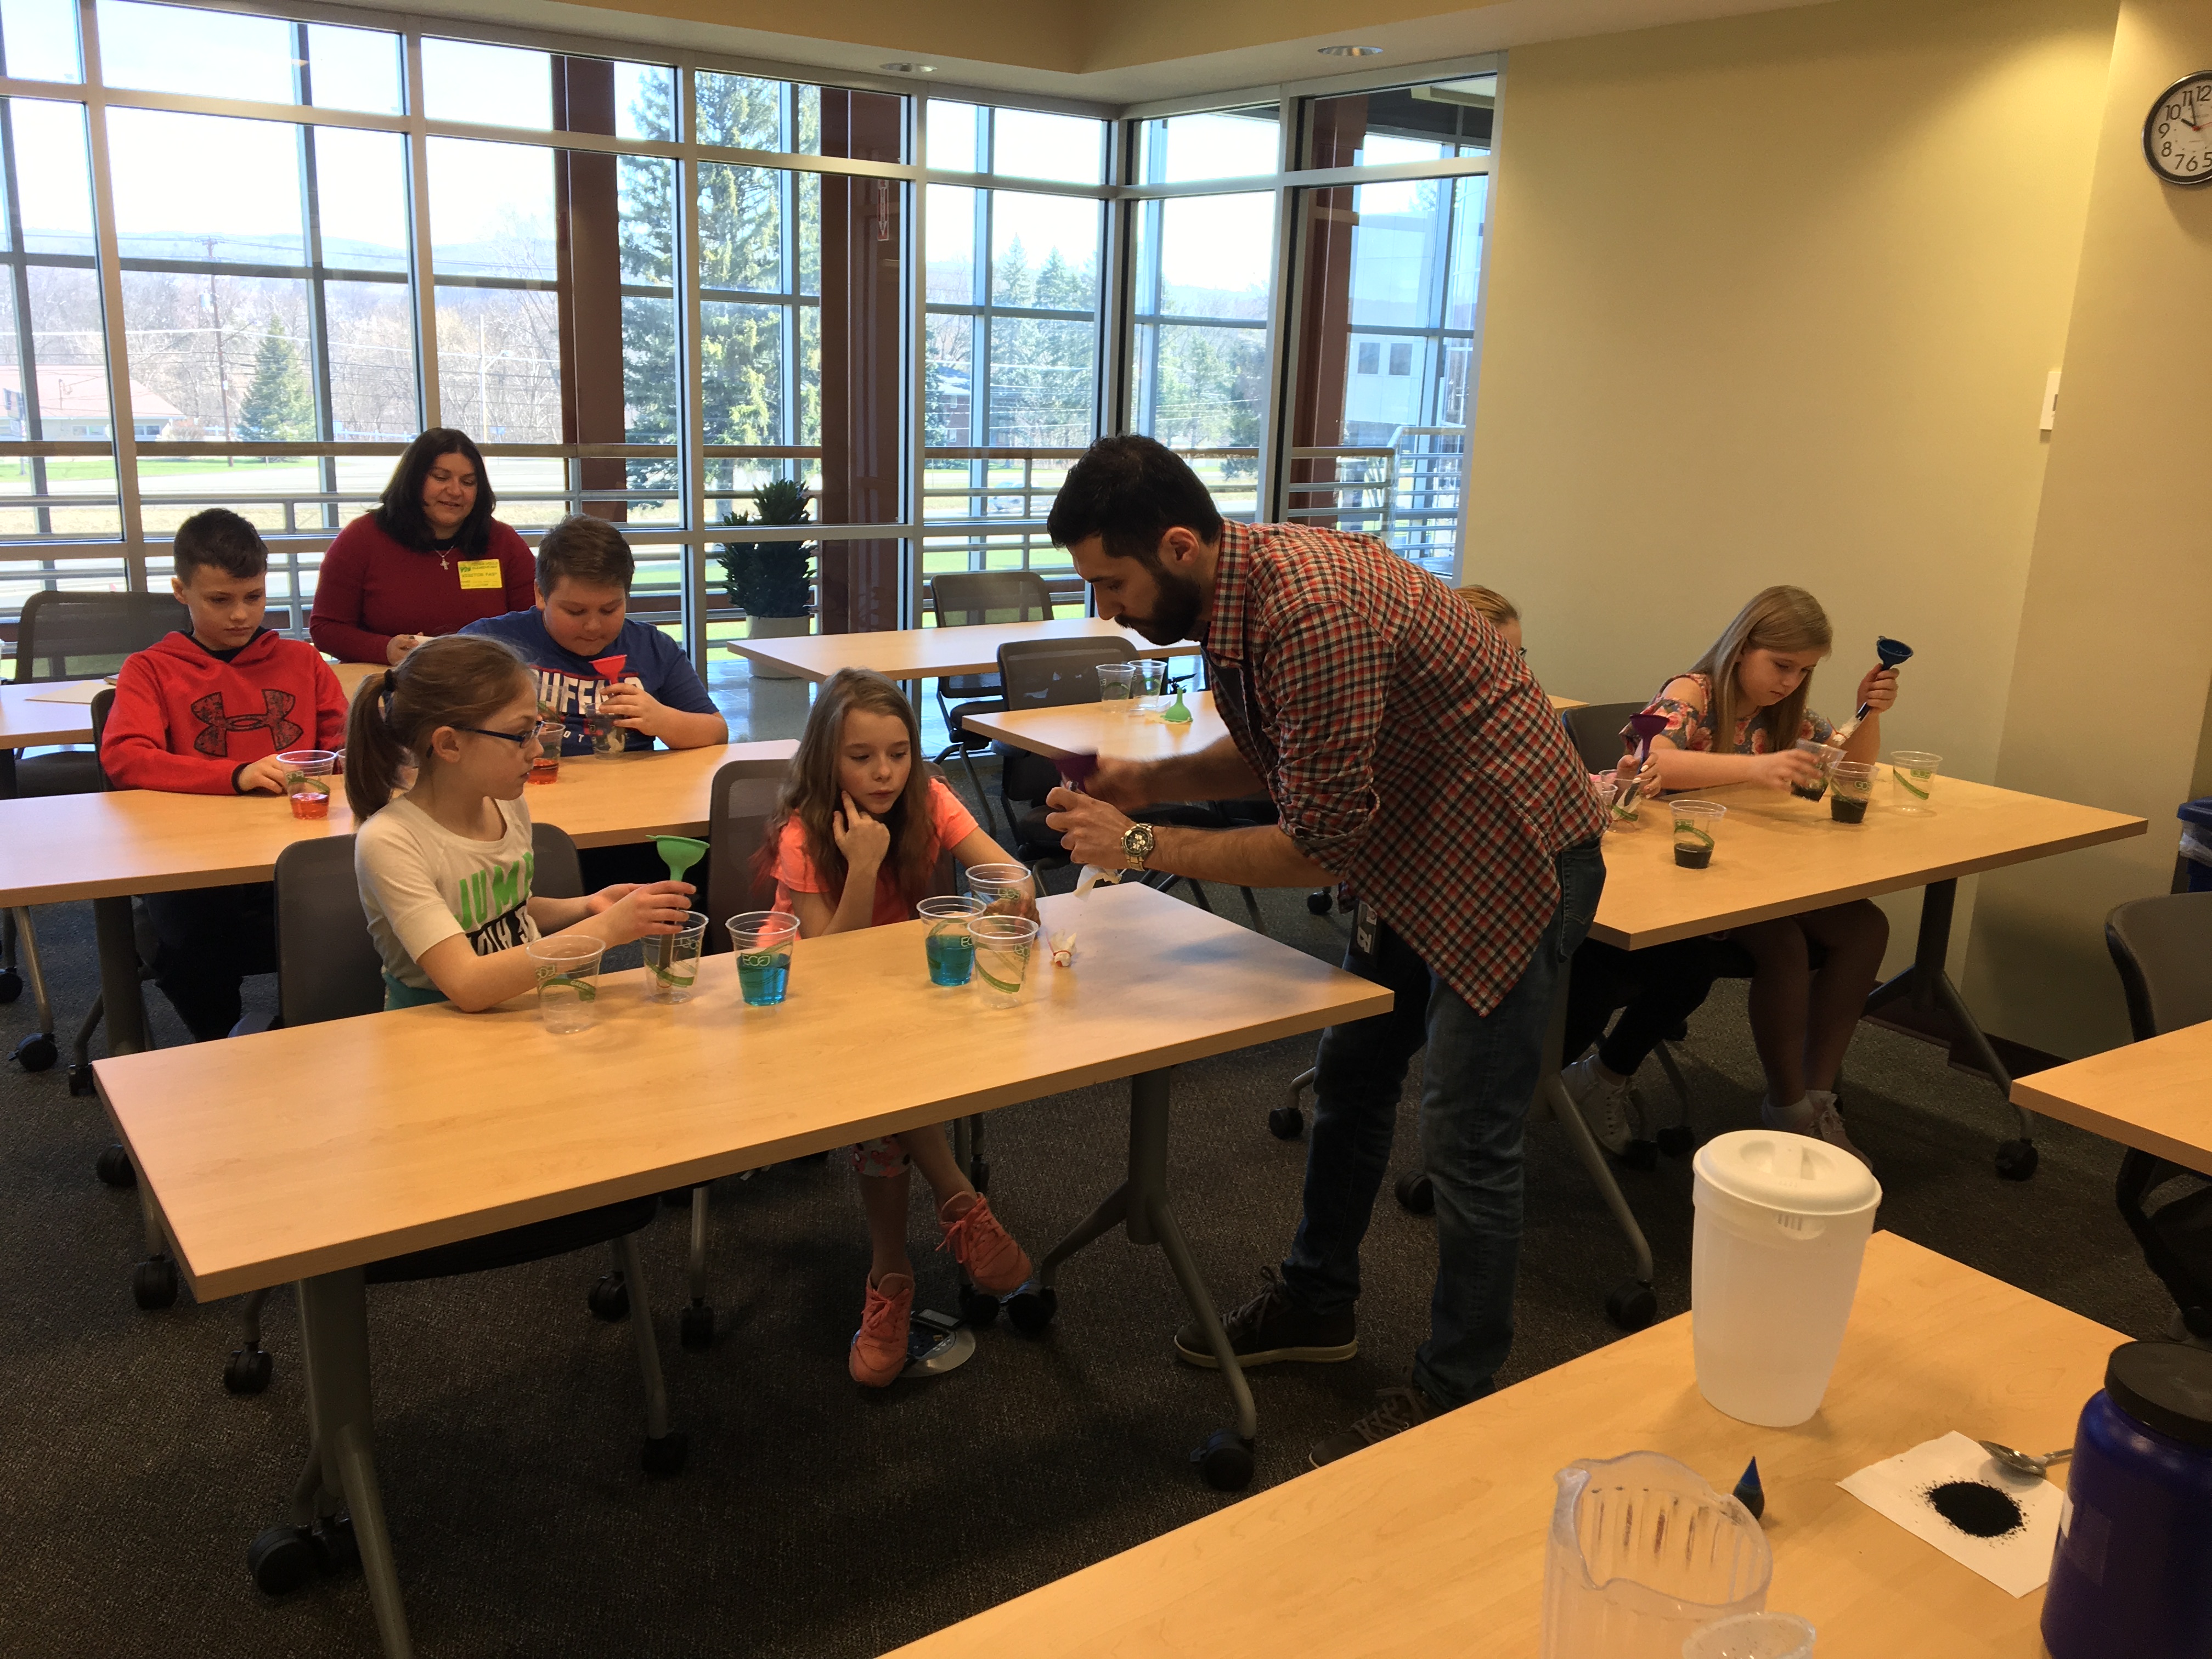 Morteza helping students with adsorption outreach activity